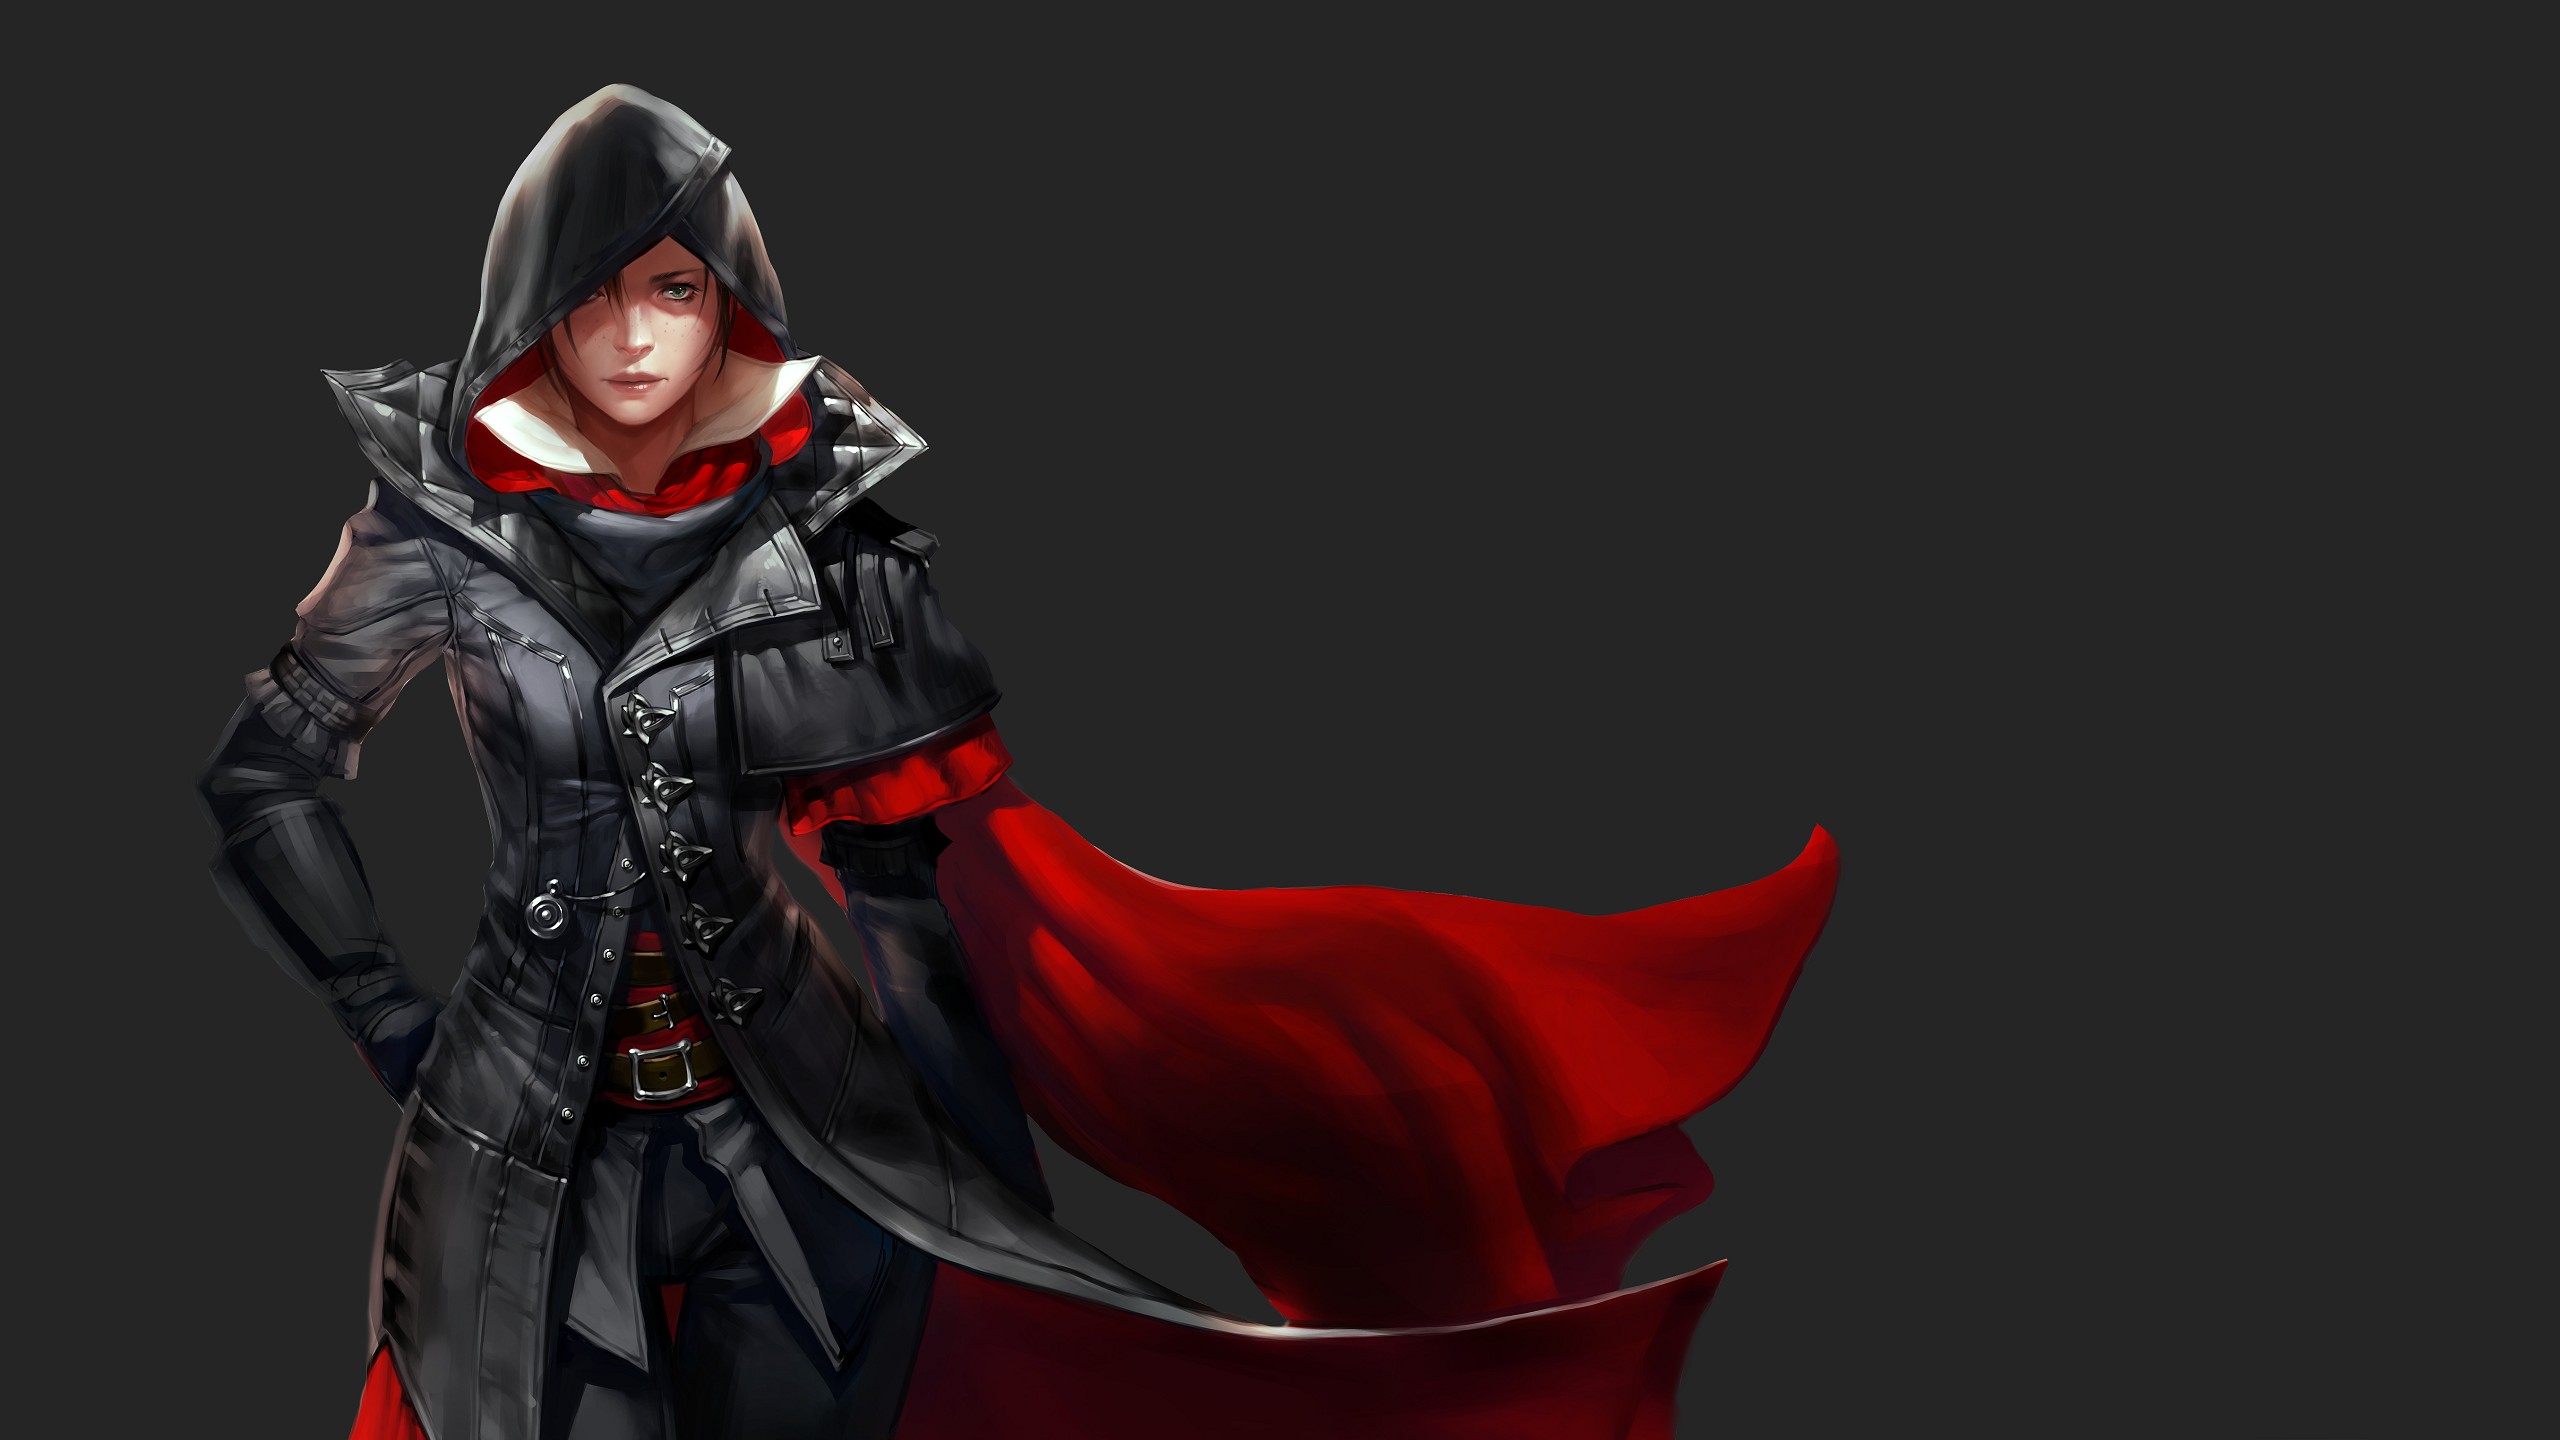 Evie Frye, Women, Looking at viewer, Green eyes, Freckles, The gap, Brunette, Assassins Creed Syndicate, Assassins Creed, Video games, Simple background, Cape, Hoods, Digital art Wallpaper